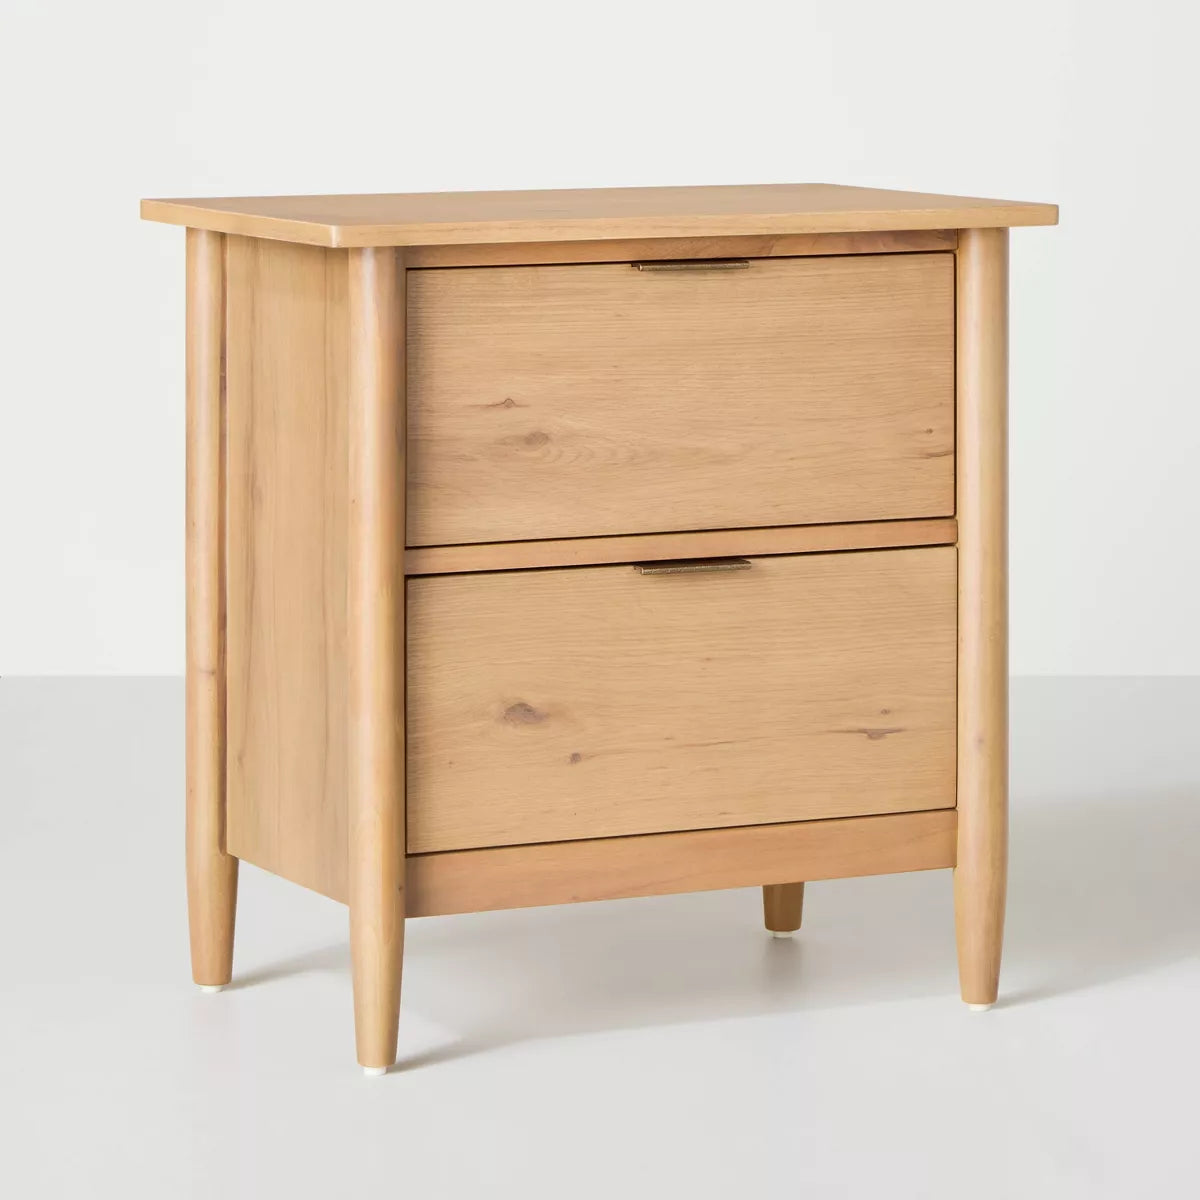 2-Drawer Wood Nightstand - Hearth & Hand™ with Magnolia